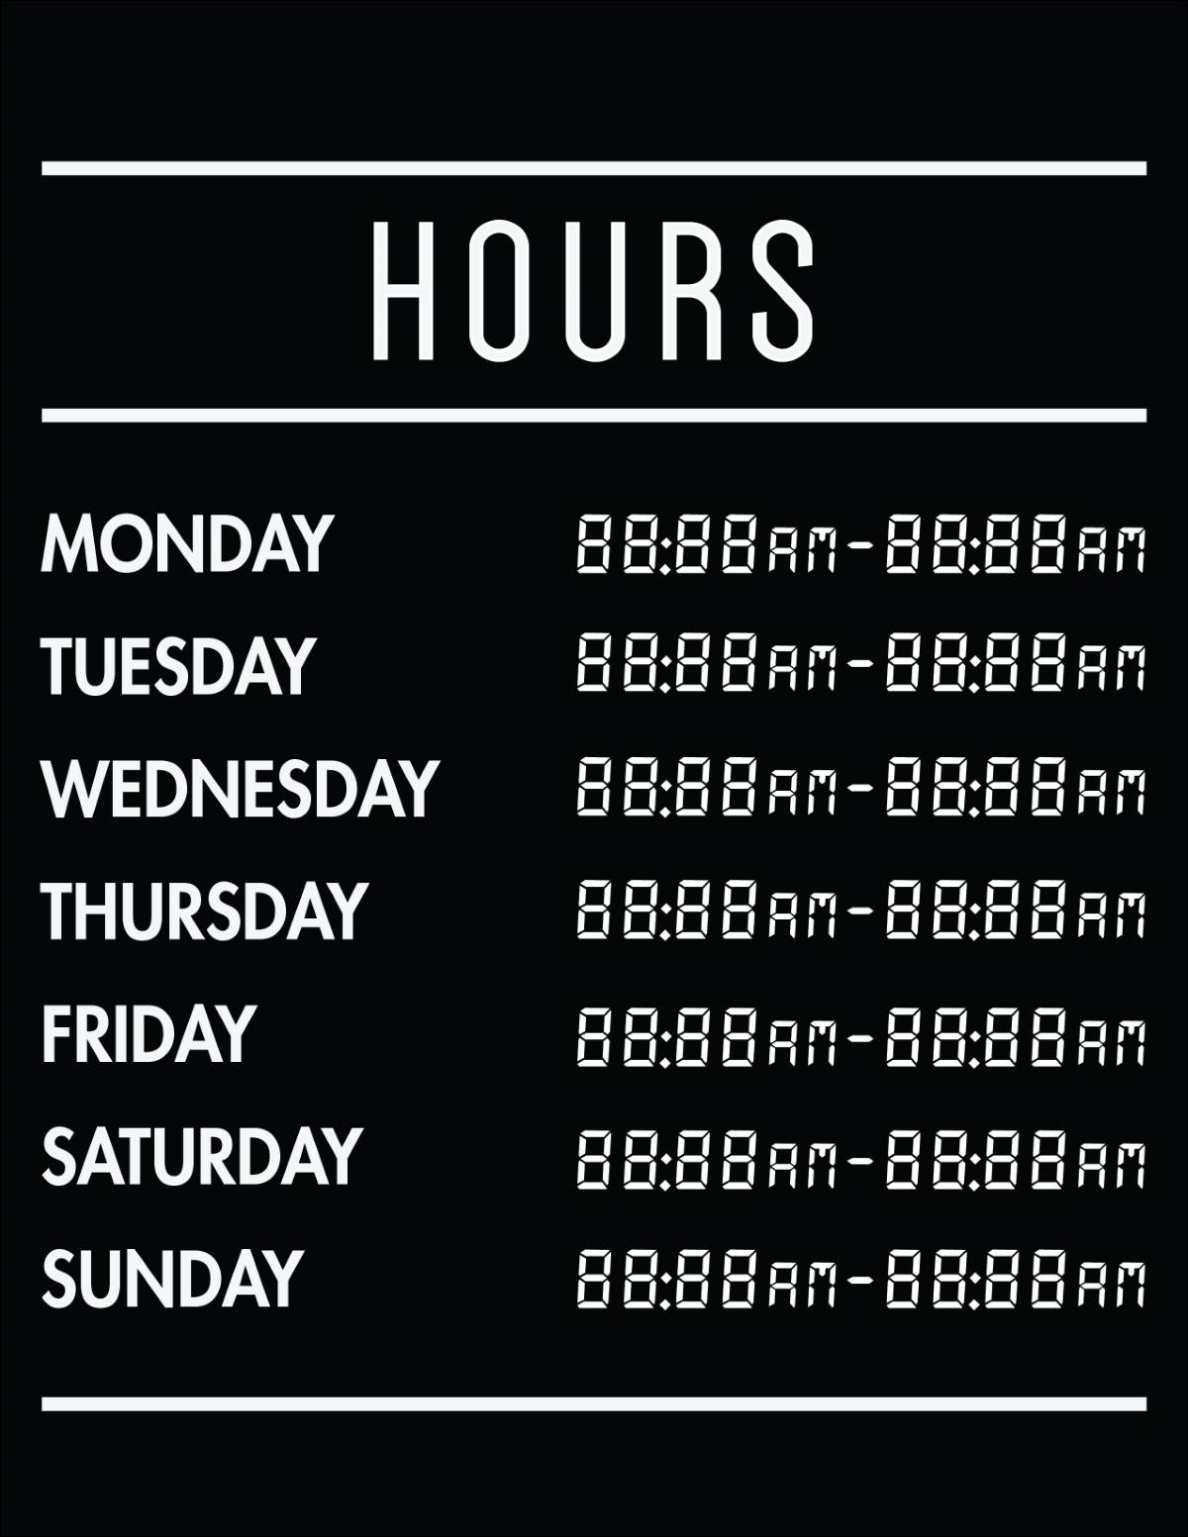 50 Free Business Hours Of Operation Sign Templates | Customize & Print For Printable Business Hours Sign Template